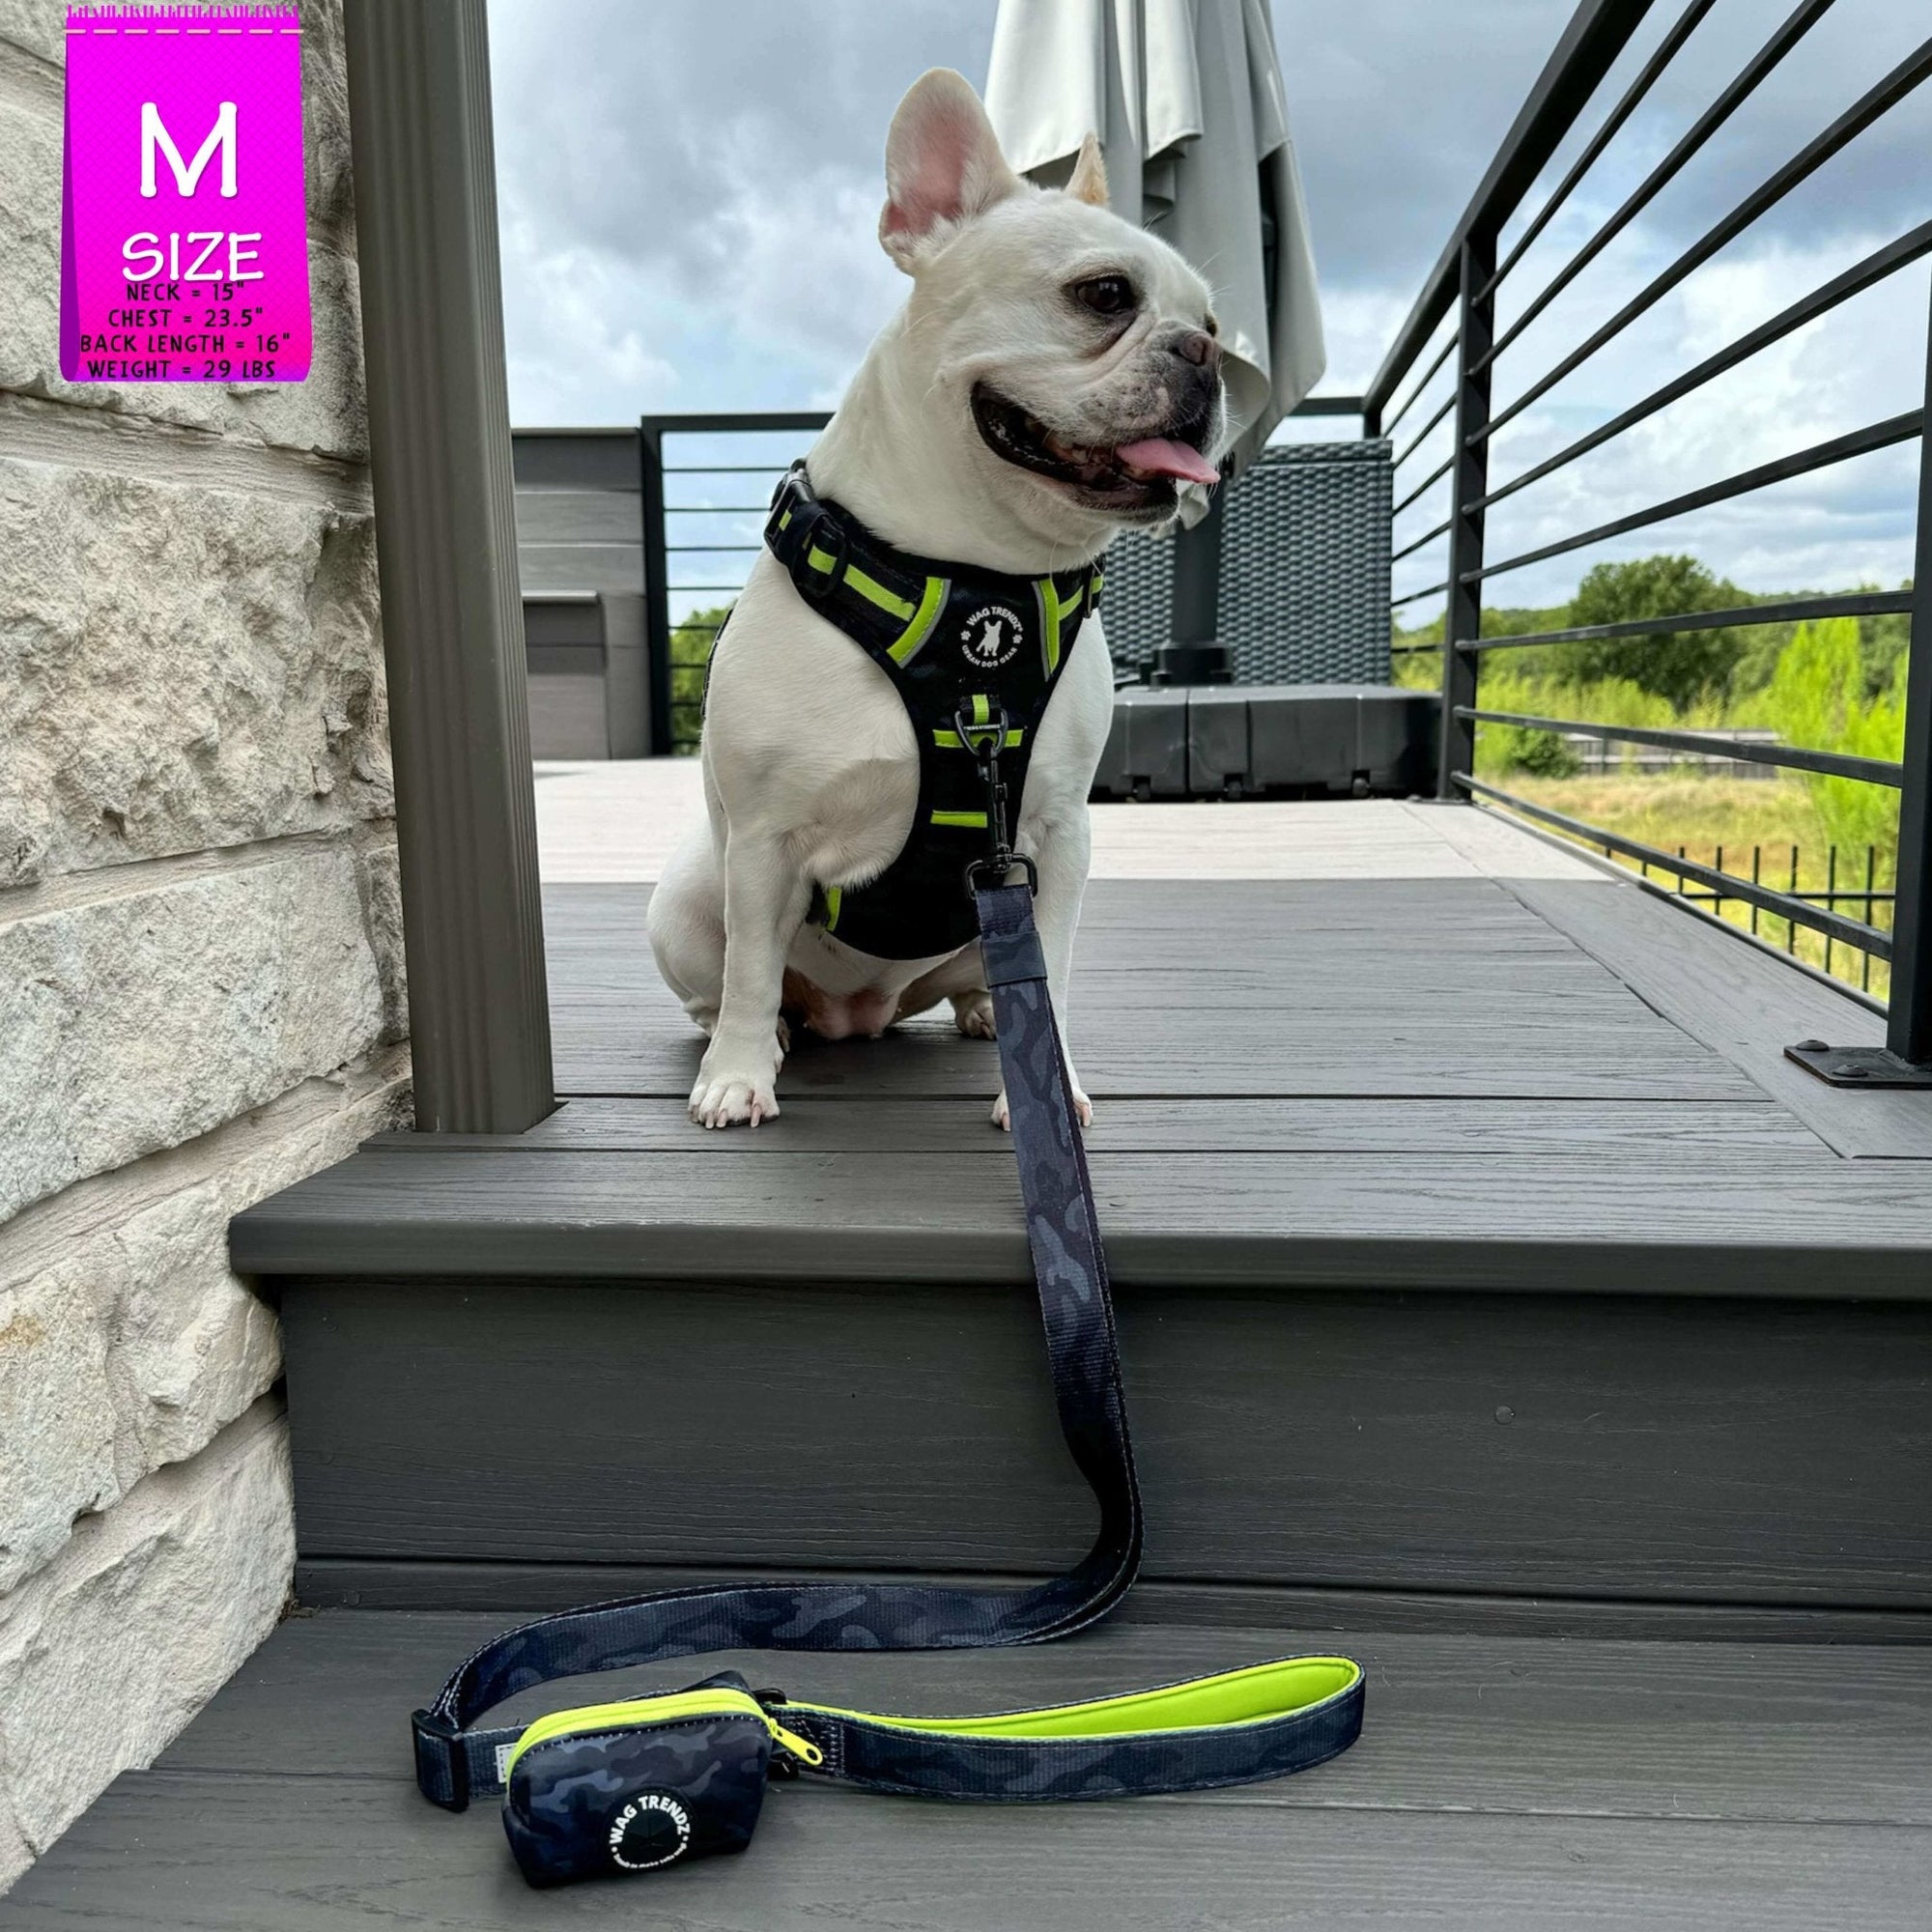 Dog Harness and Leash Set + Poo Bag Holder - French Bulldog wearing Medium no pull harness with handle in black and gray camo with hi vis accents - with matching adjustable leash and poop bag holder attached - sitting on a grey deck outdoors - Wag Trendz